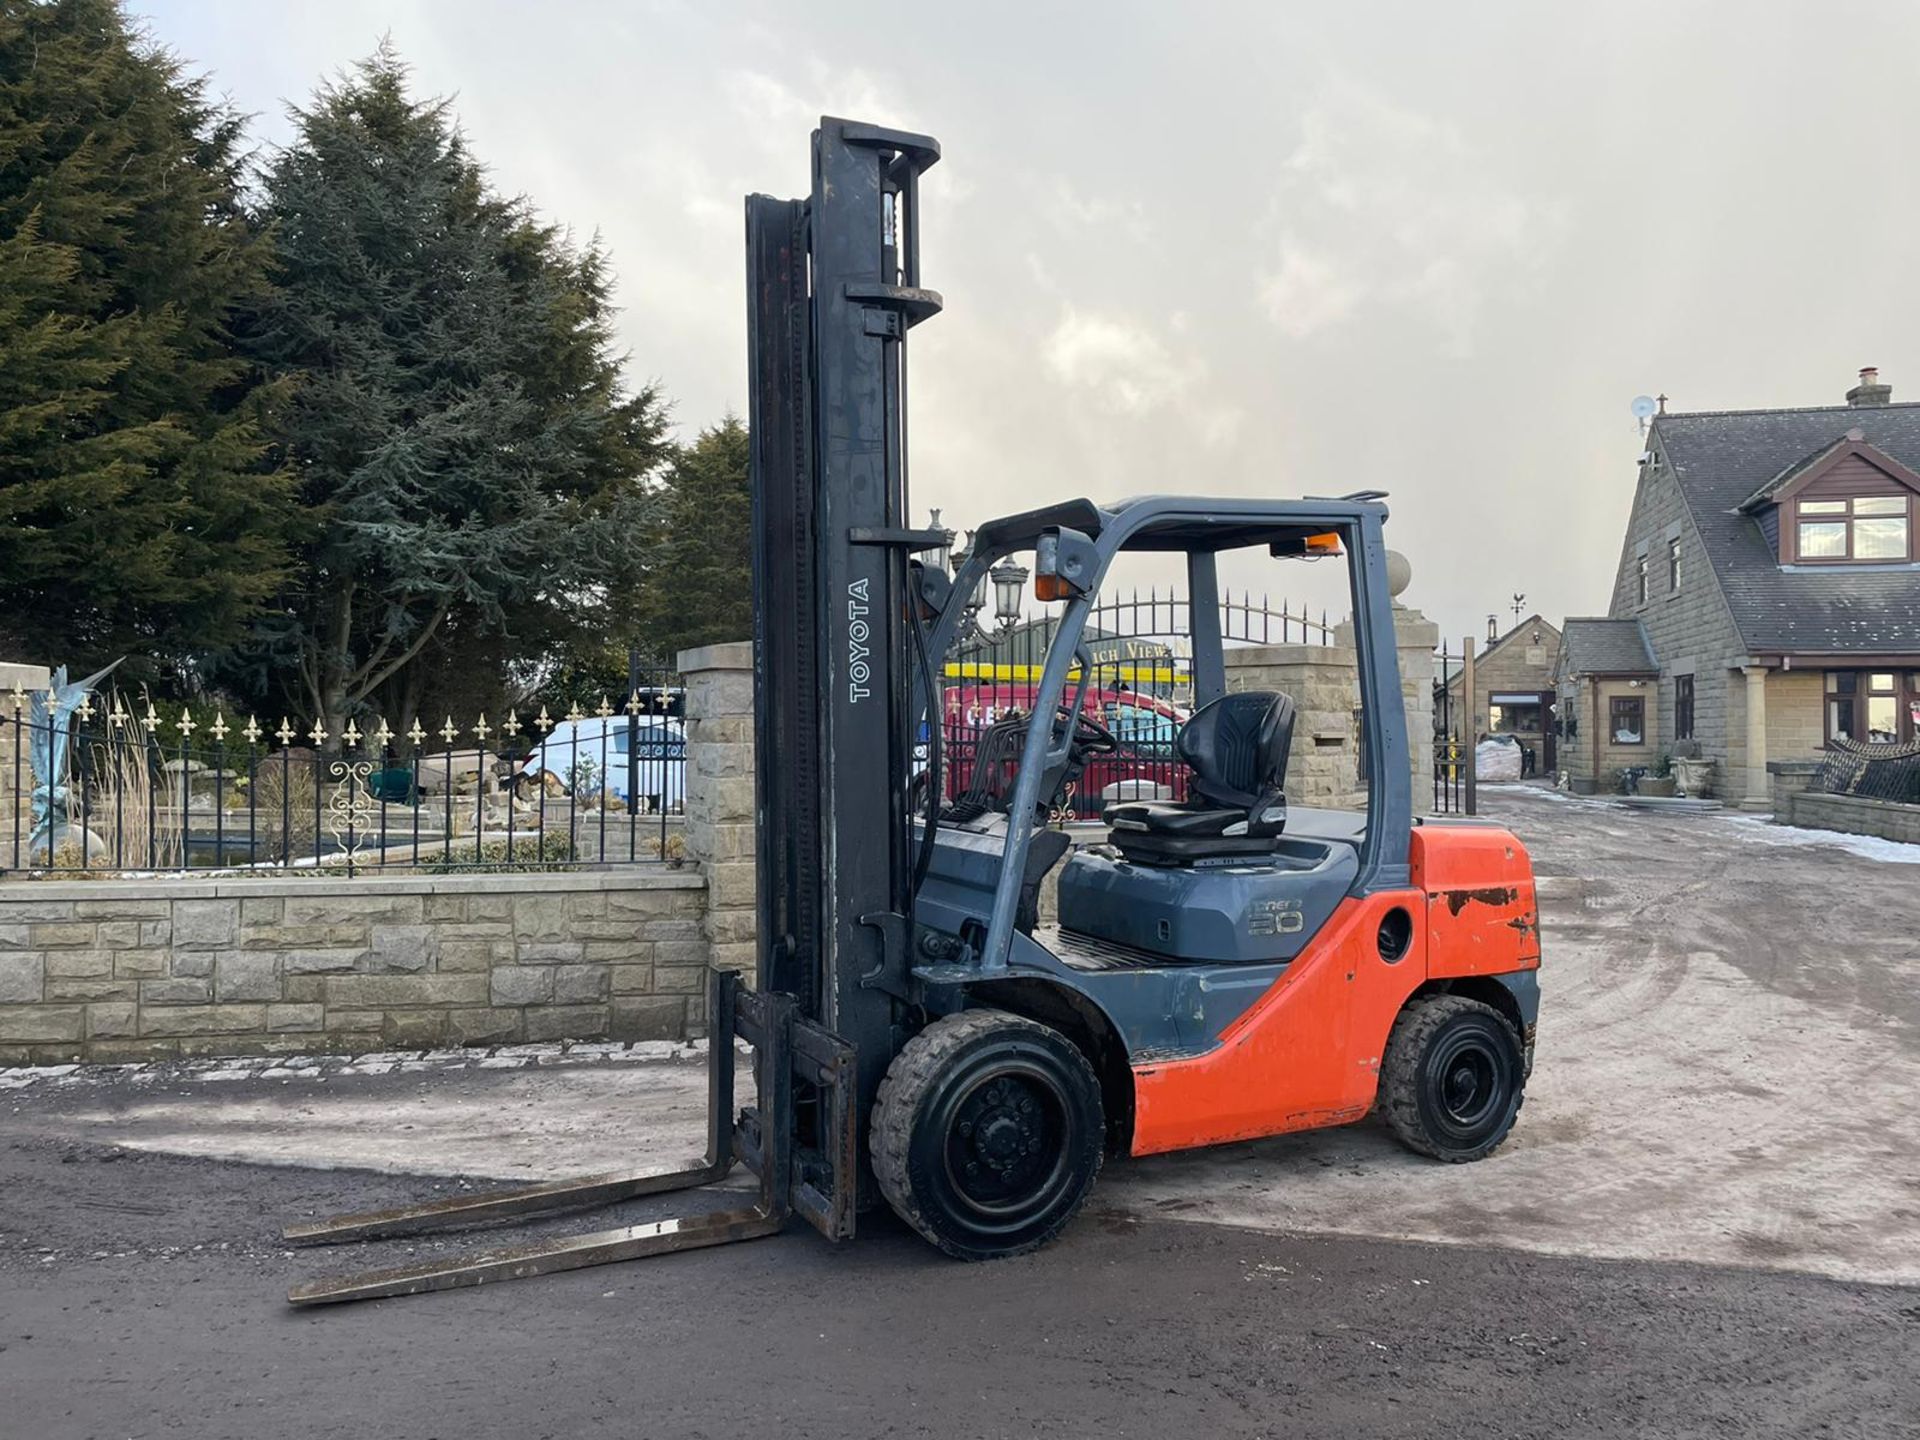 2013 TOYOTA TONERO 30 FORKLIFT, RUNS, DRIVES AND LIFTS, LOW 4720 HOURS *PLUS VAT* - Image 2 of 9